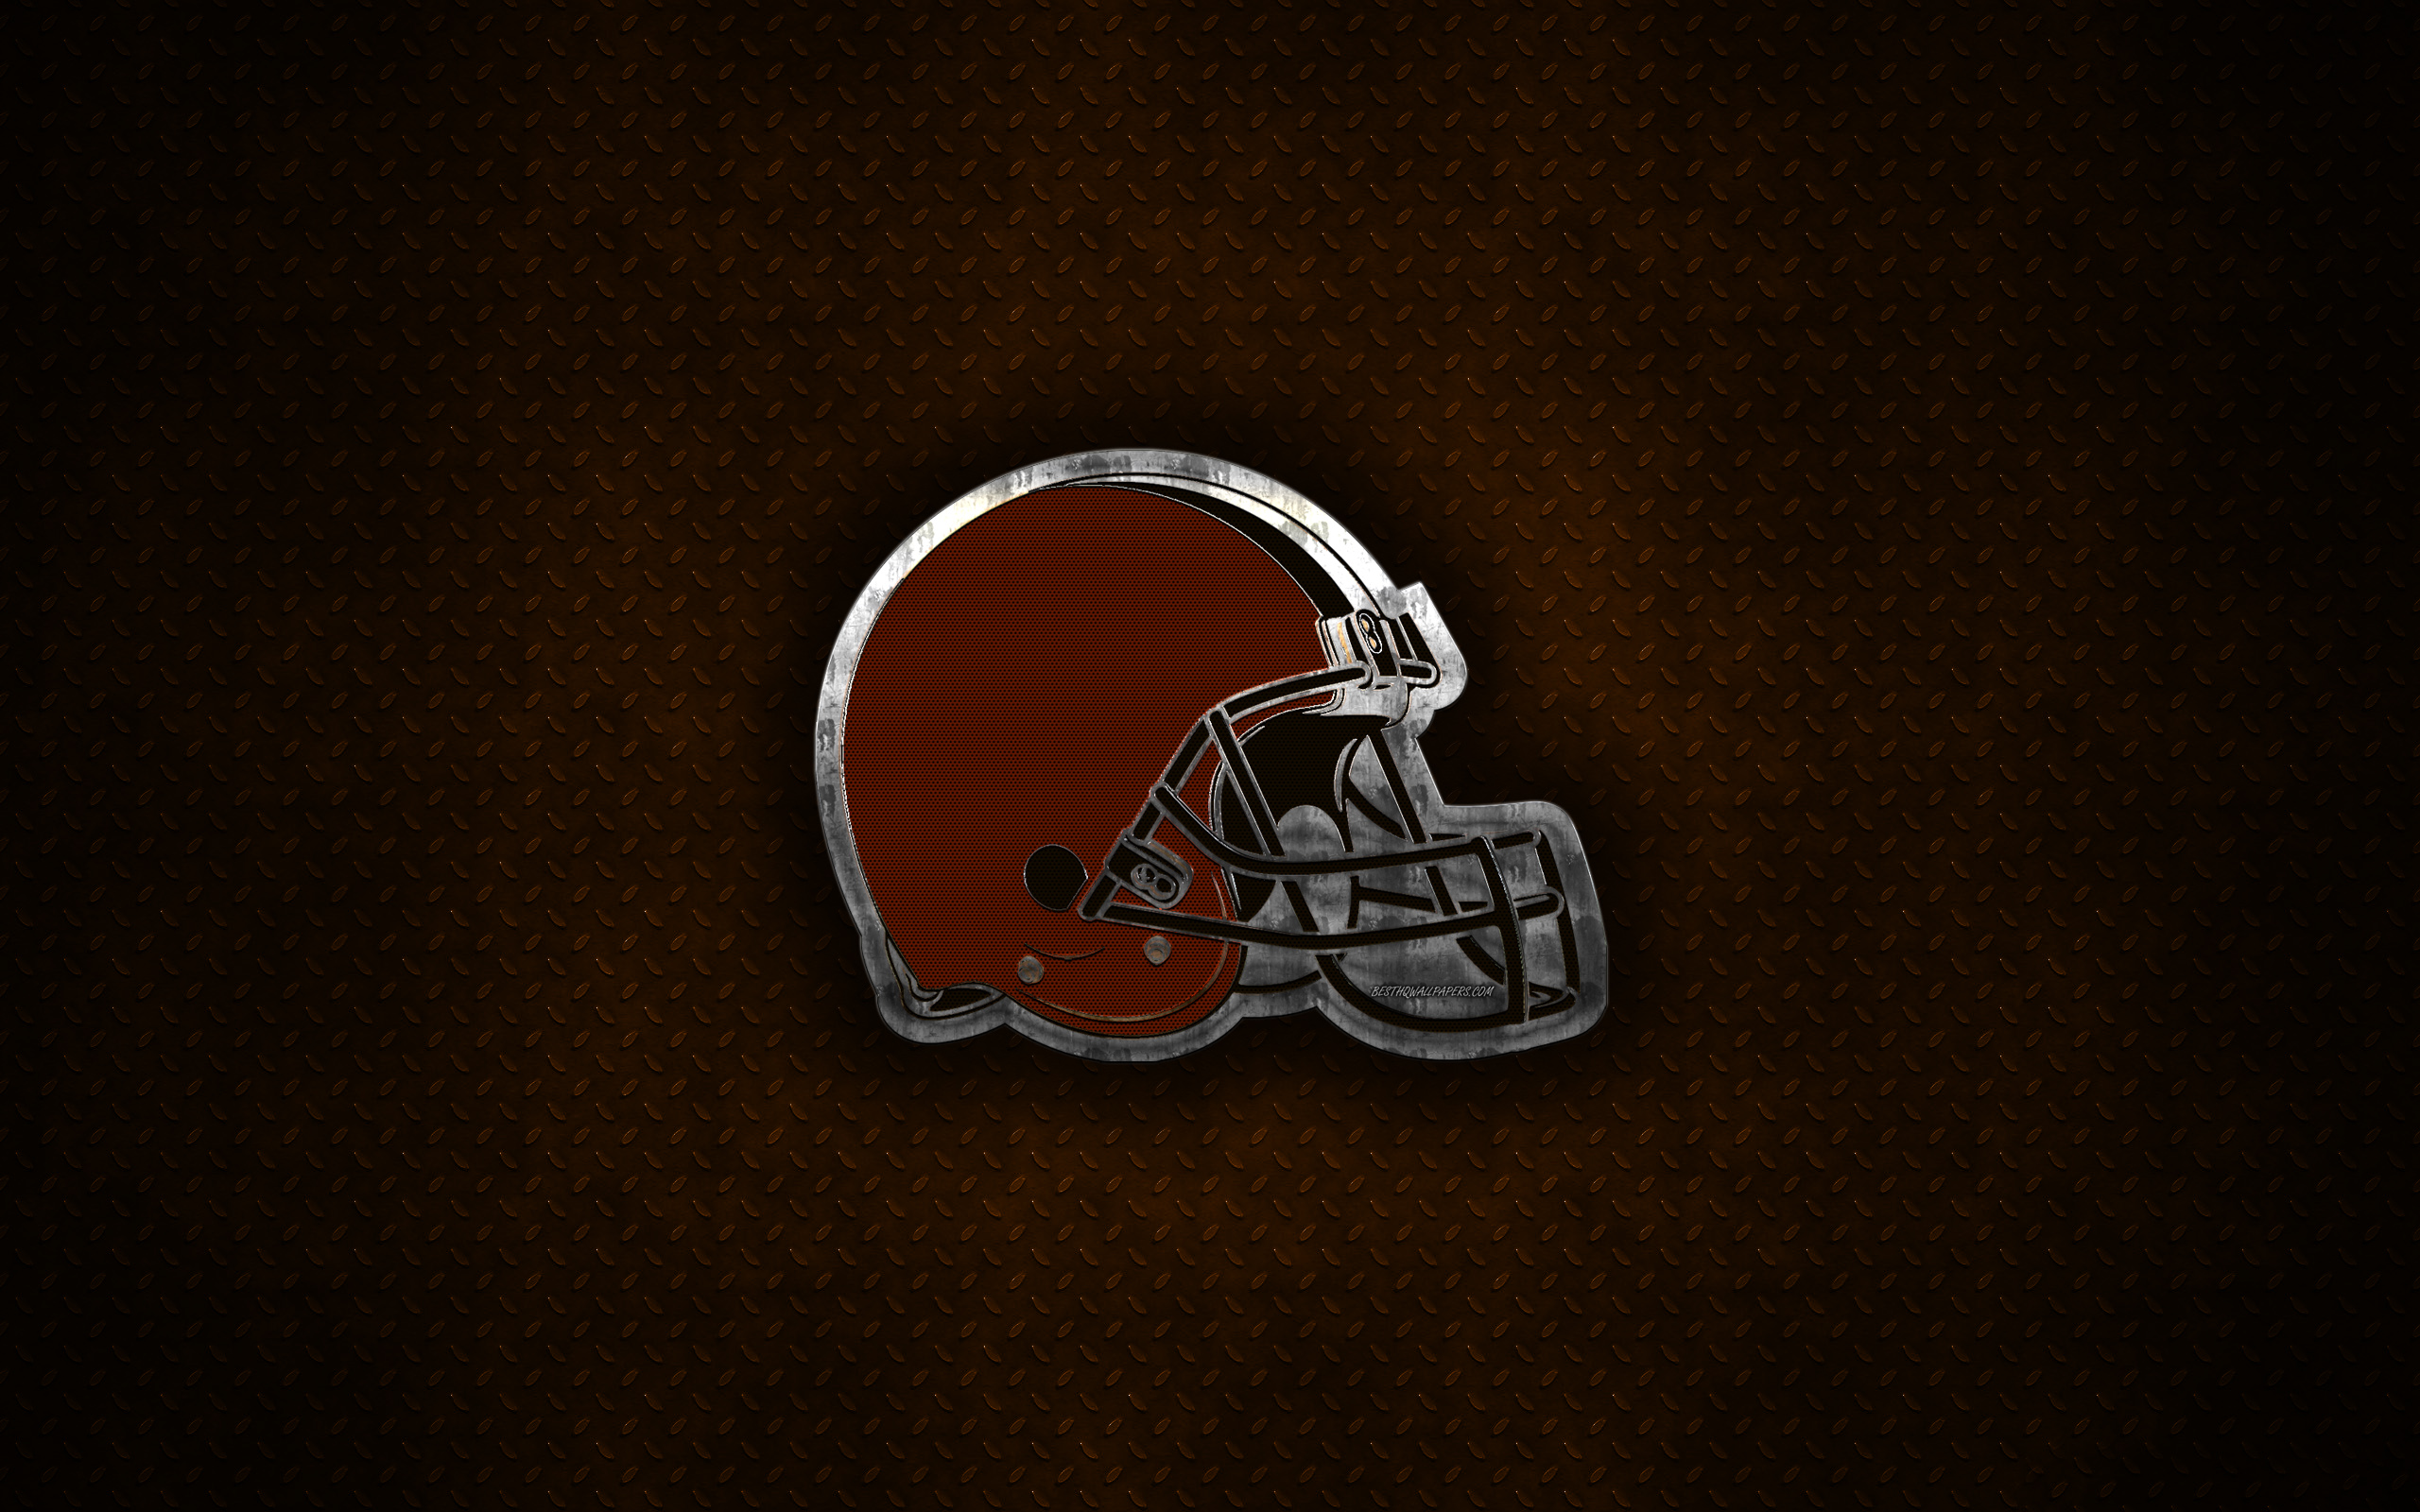 Download wallpapers cleveland browns american football club metal logo cleveland ohio usa creative art nfl emblem brown metal background american football national football league for desktop with resolution x high quality hd